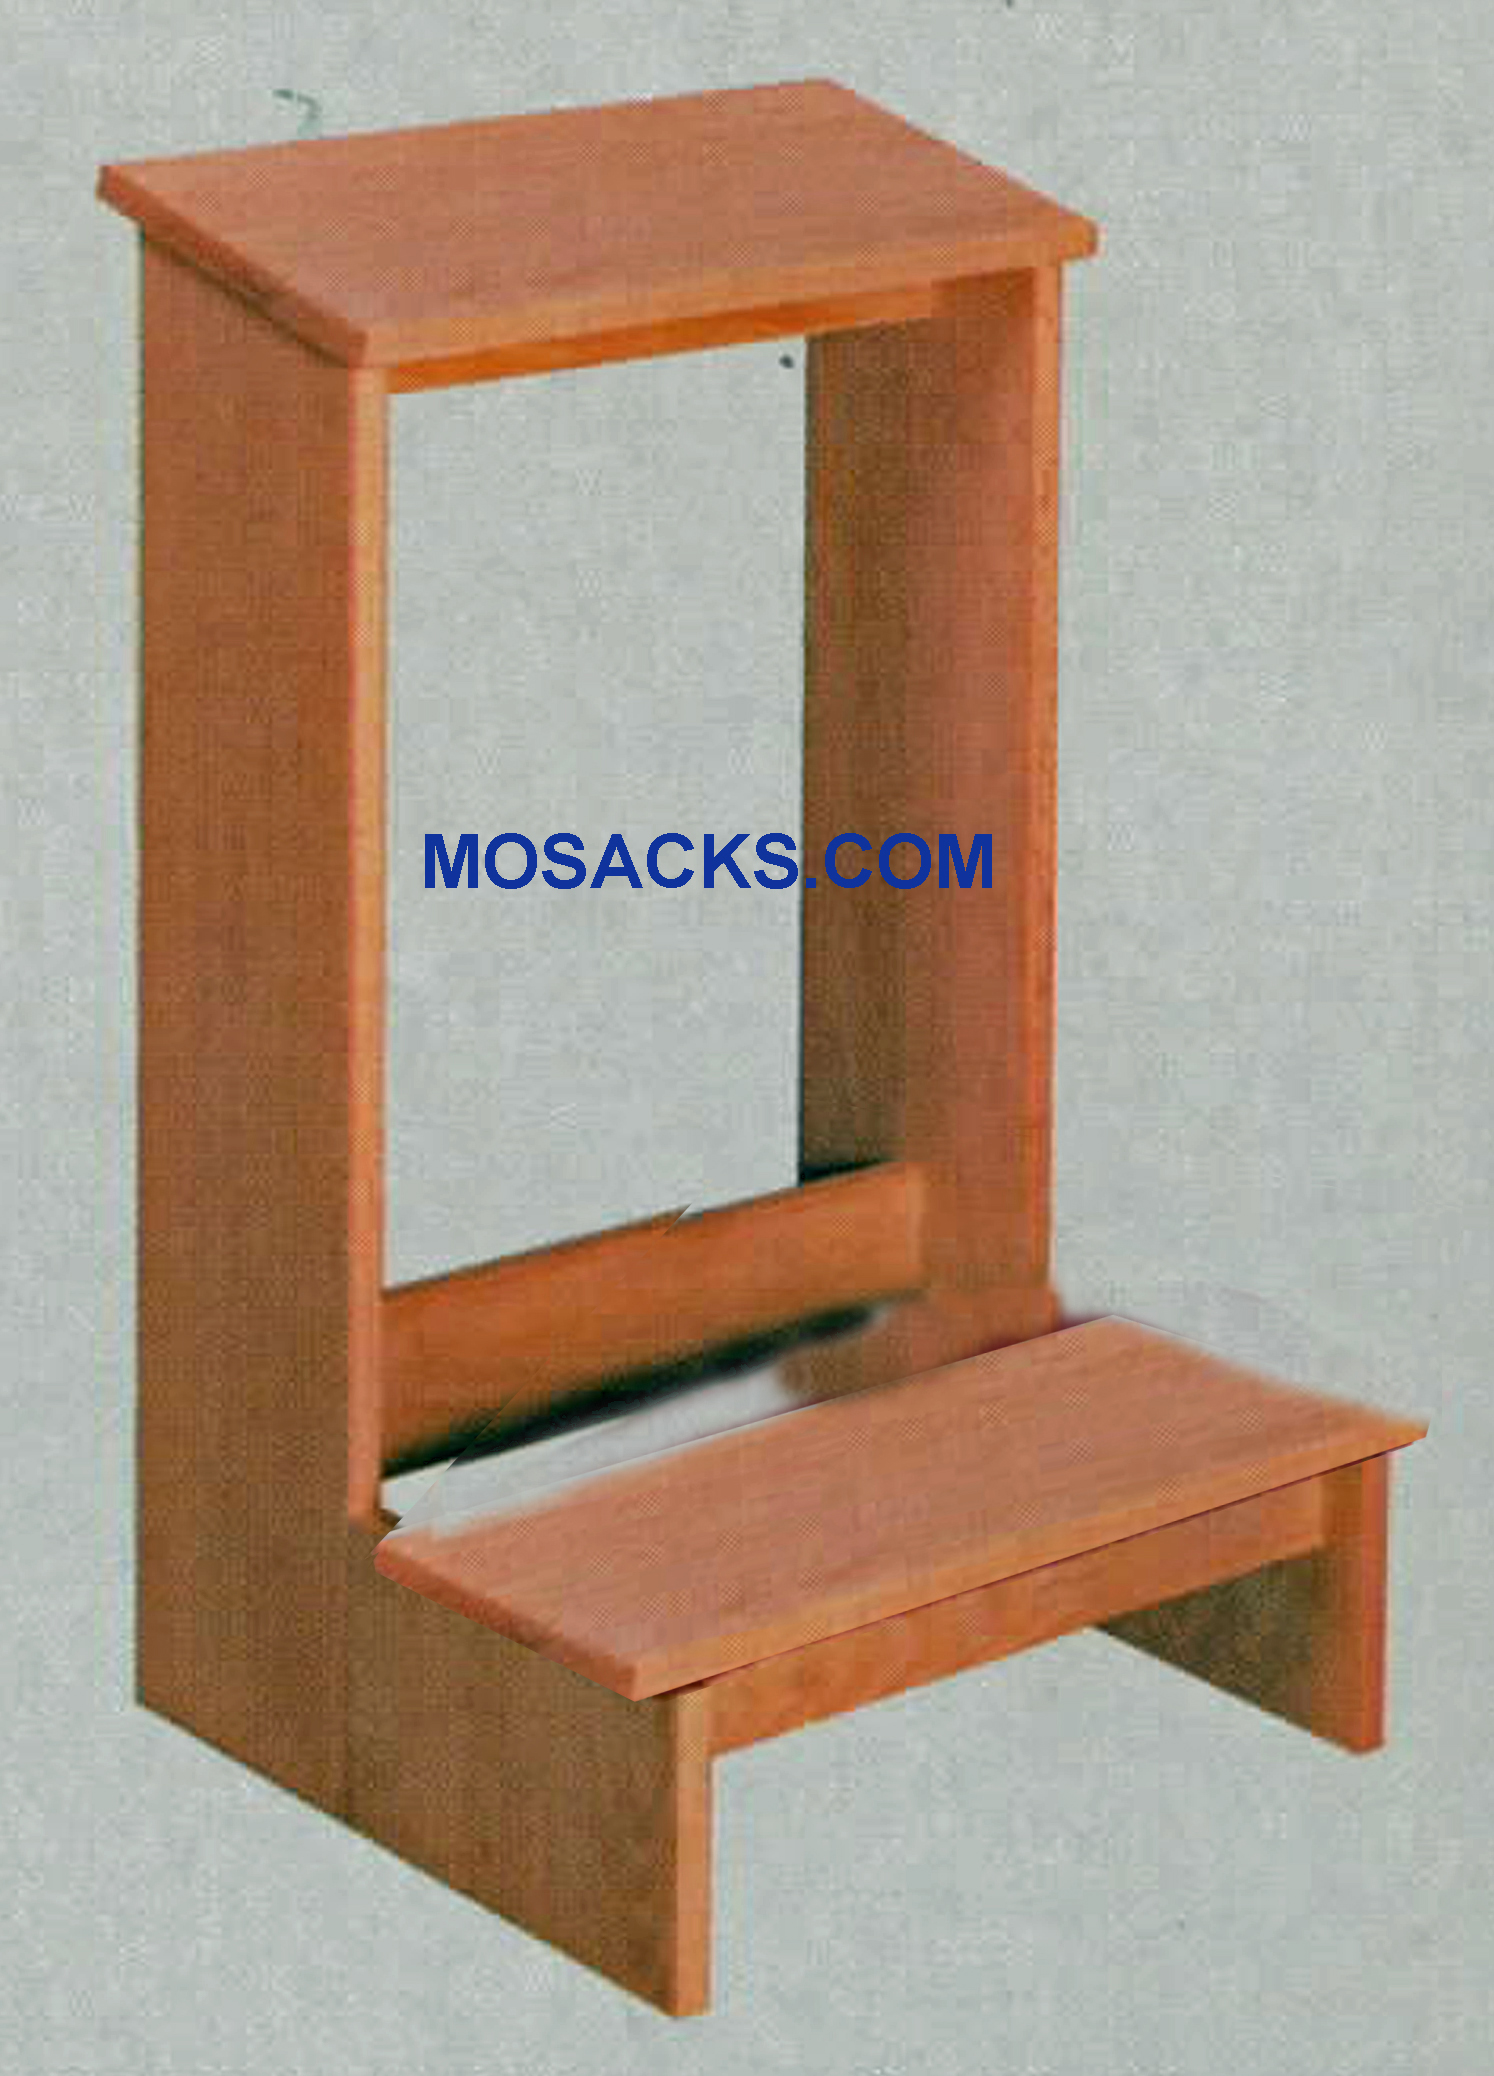 Unfinished W Brand Prie Dieu Kneeler with shelf 19" w x 19" d x 30" h 40-2303. This Prie Dieu Kneeler is unfinished with a wood kneeler and a slanted shelf for arm comfort.  Unfinished Prie Dieu Church Kneeler #2303